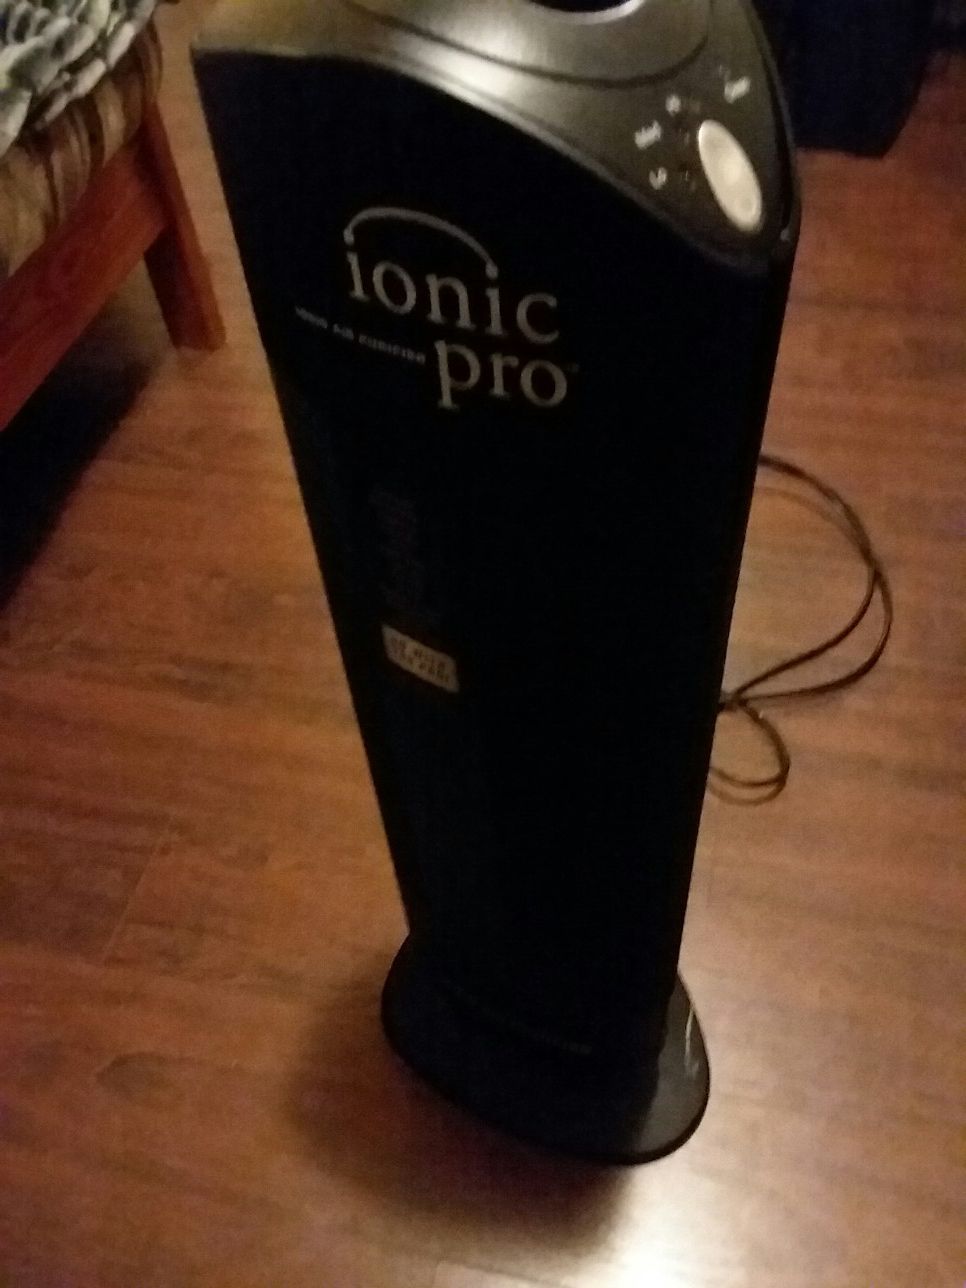 Ionic pro air purifier filter